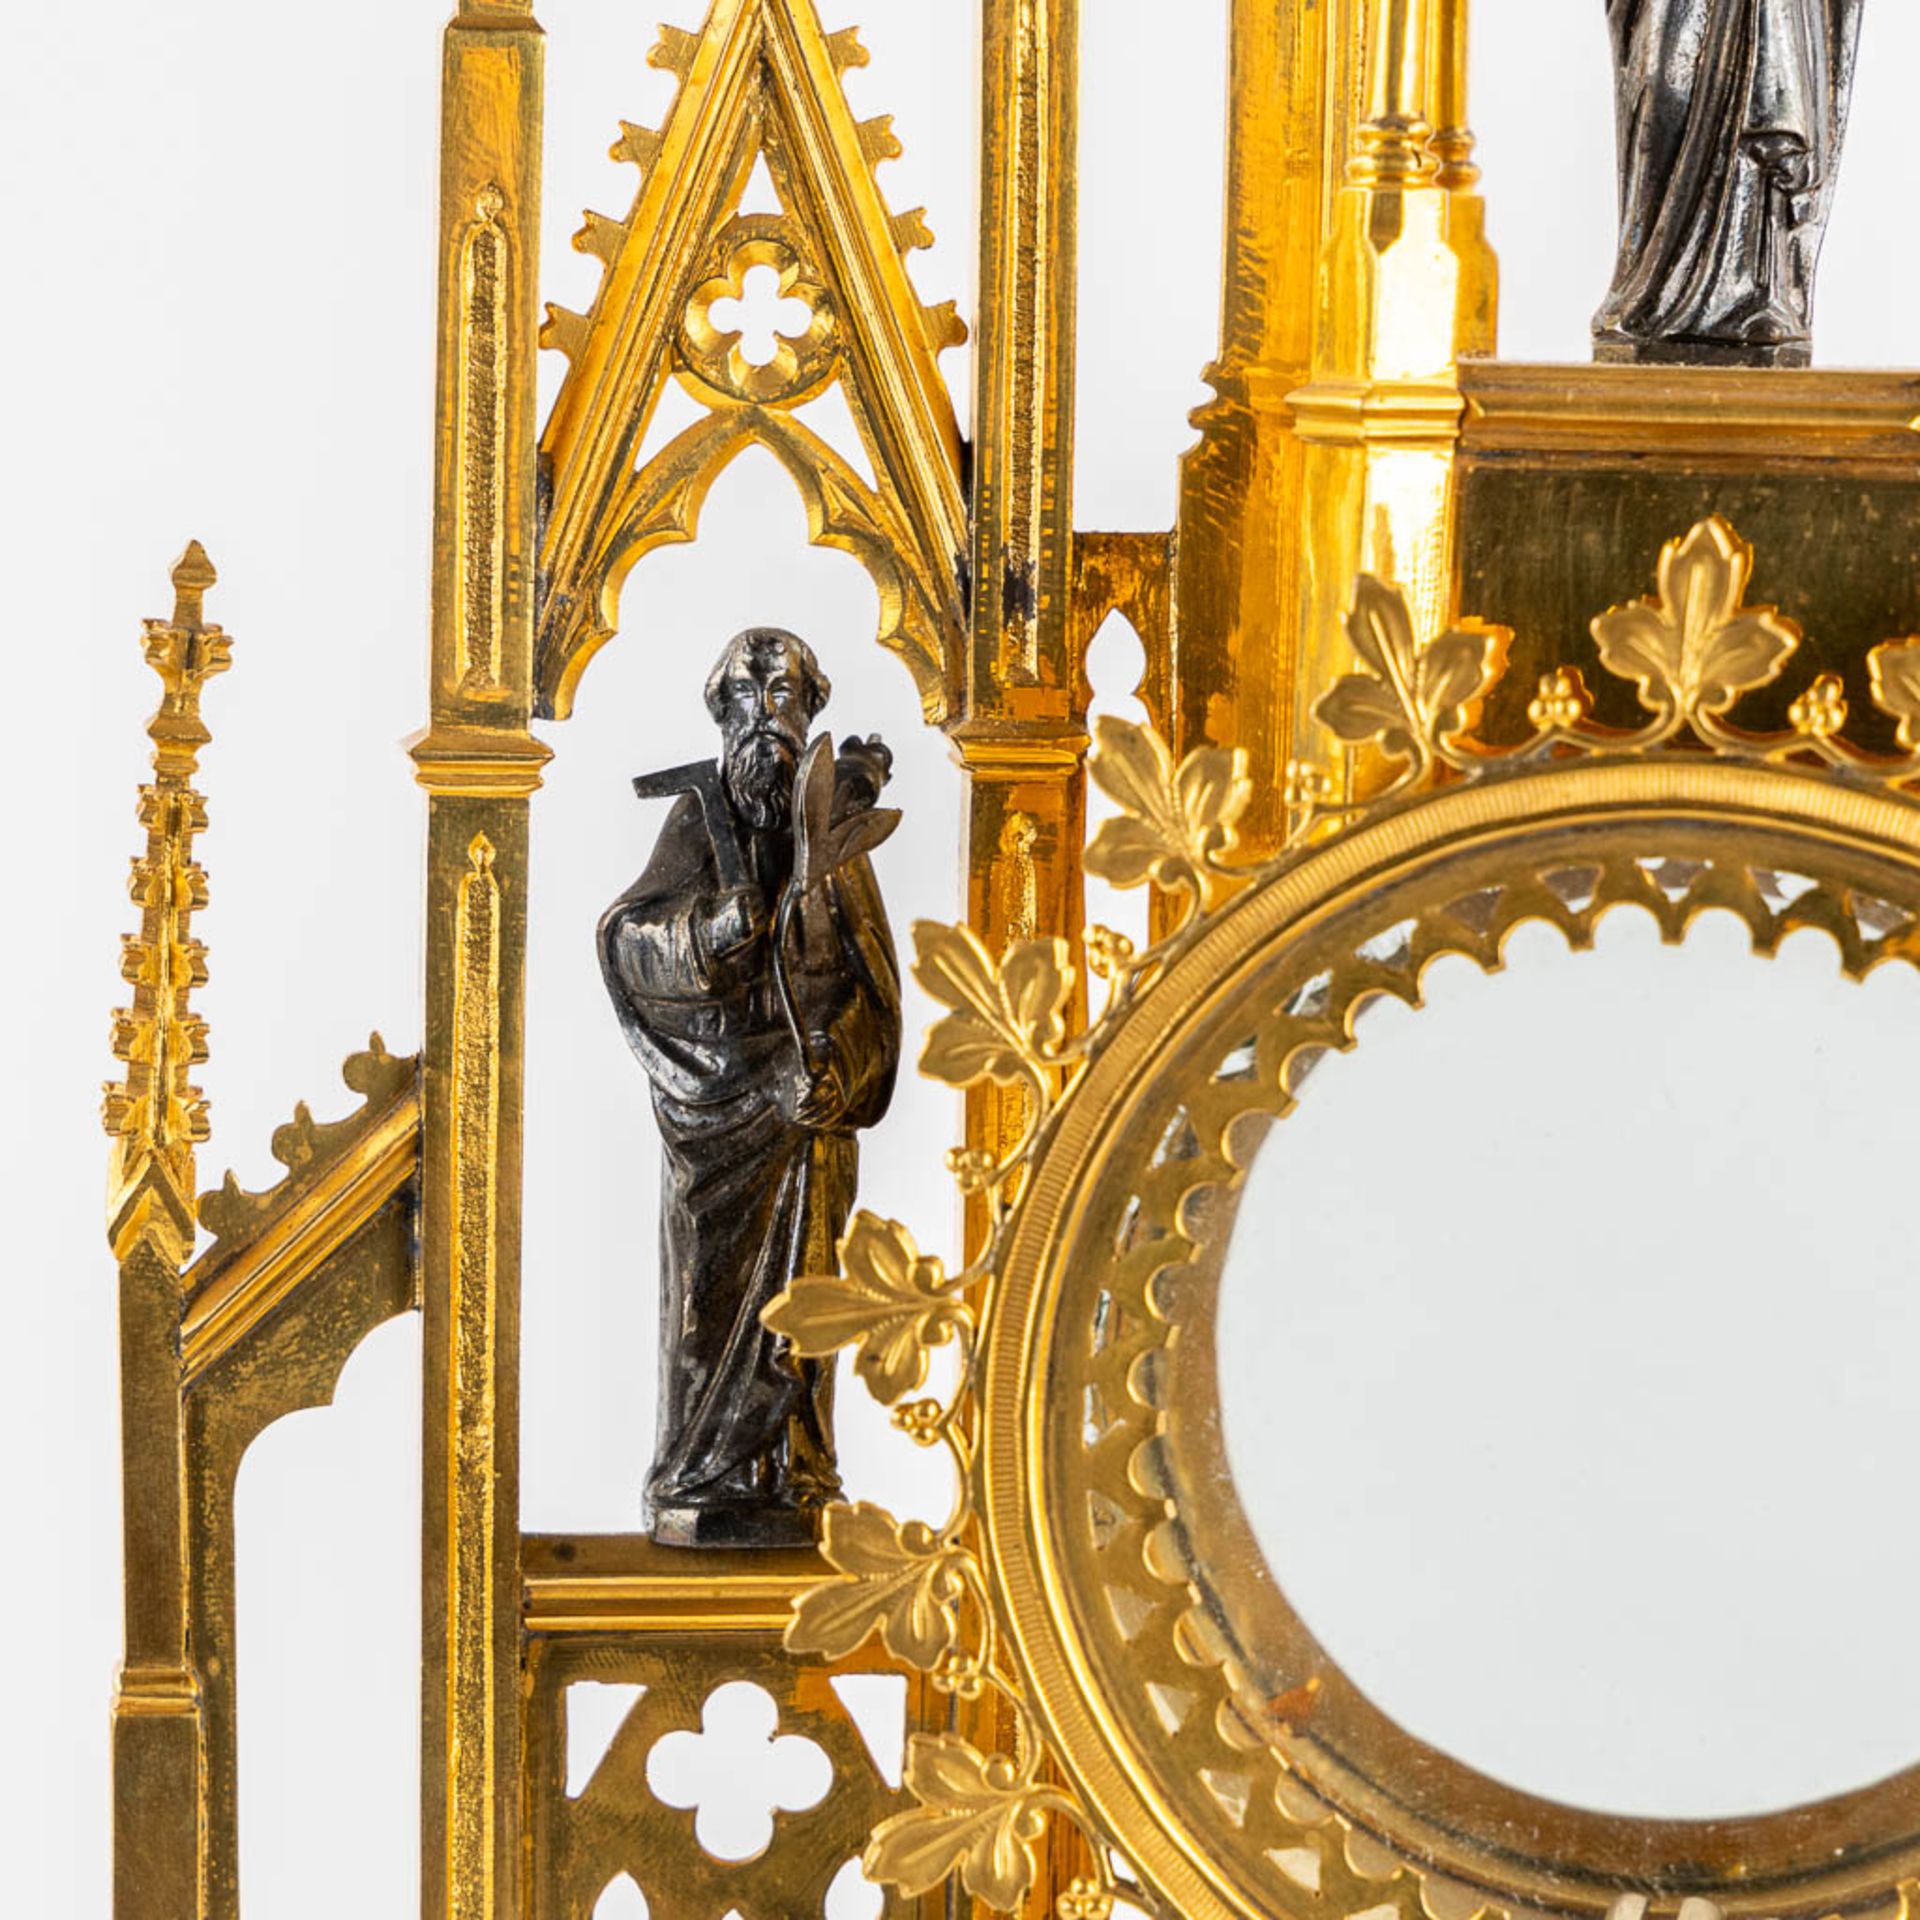 A Tower monstrance, gilt and silver plated brass, Gothic Revival. 19th C. (W:21,5 x H:58 cm) - Image 14 of 22